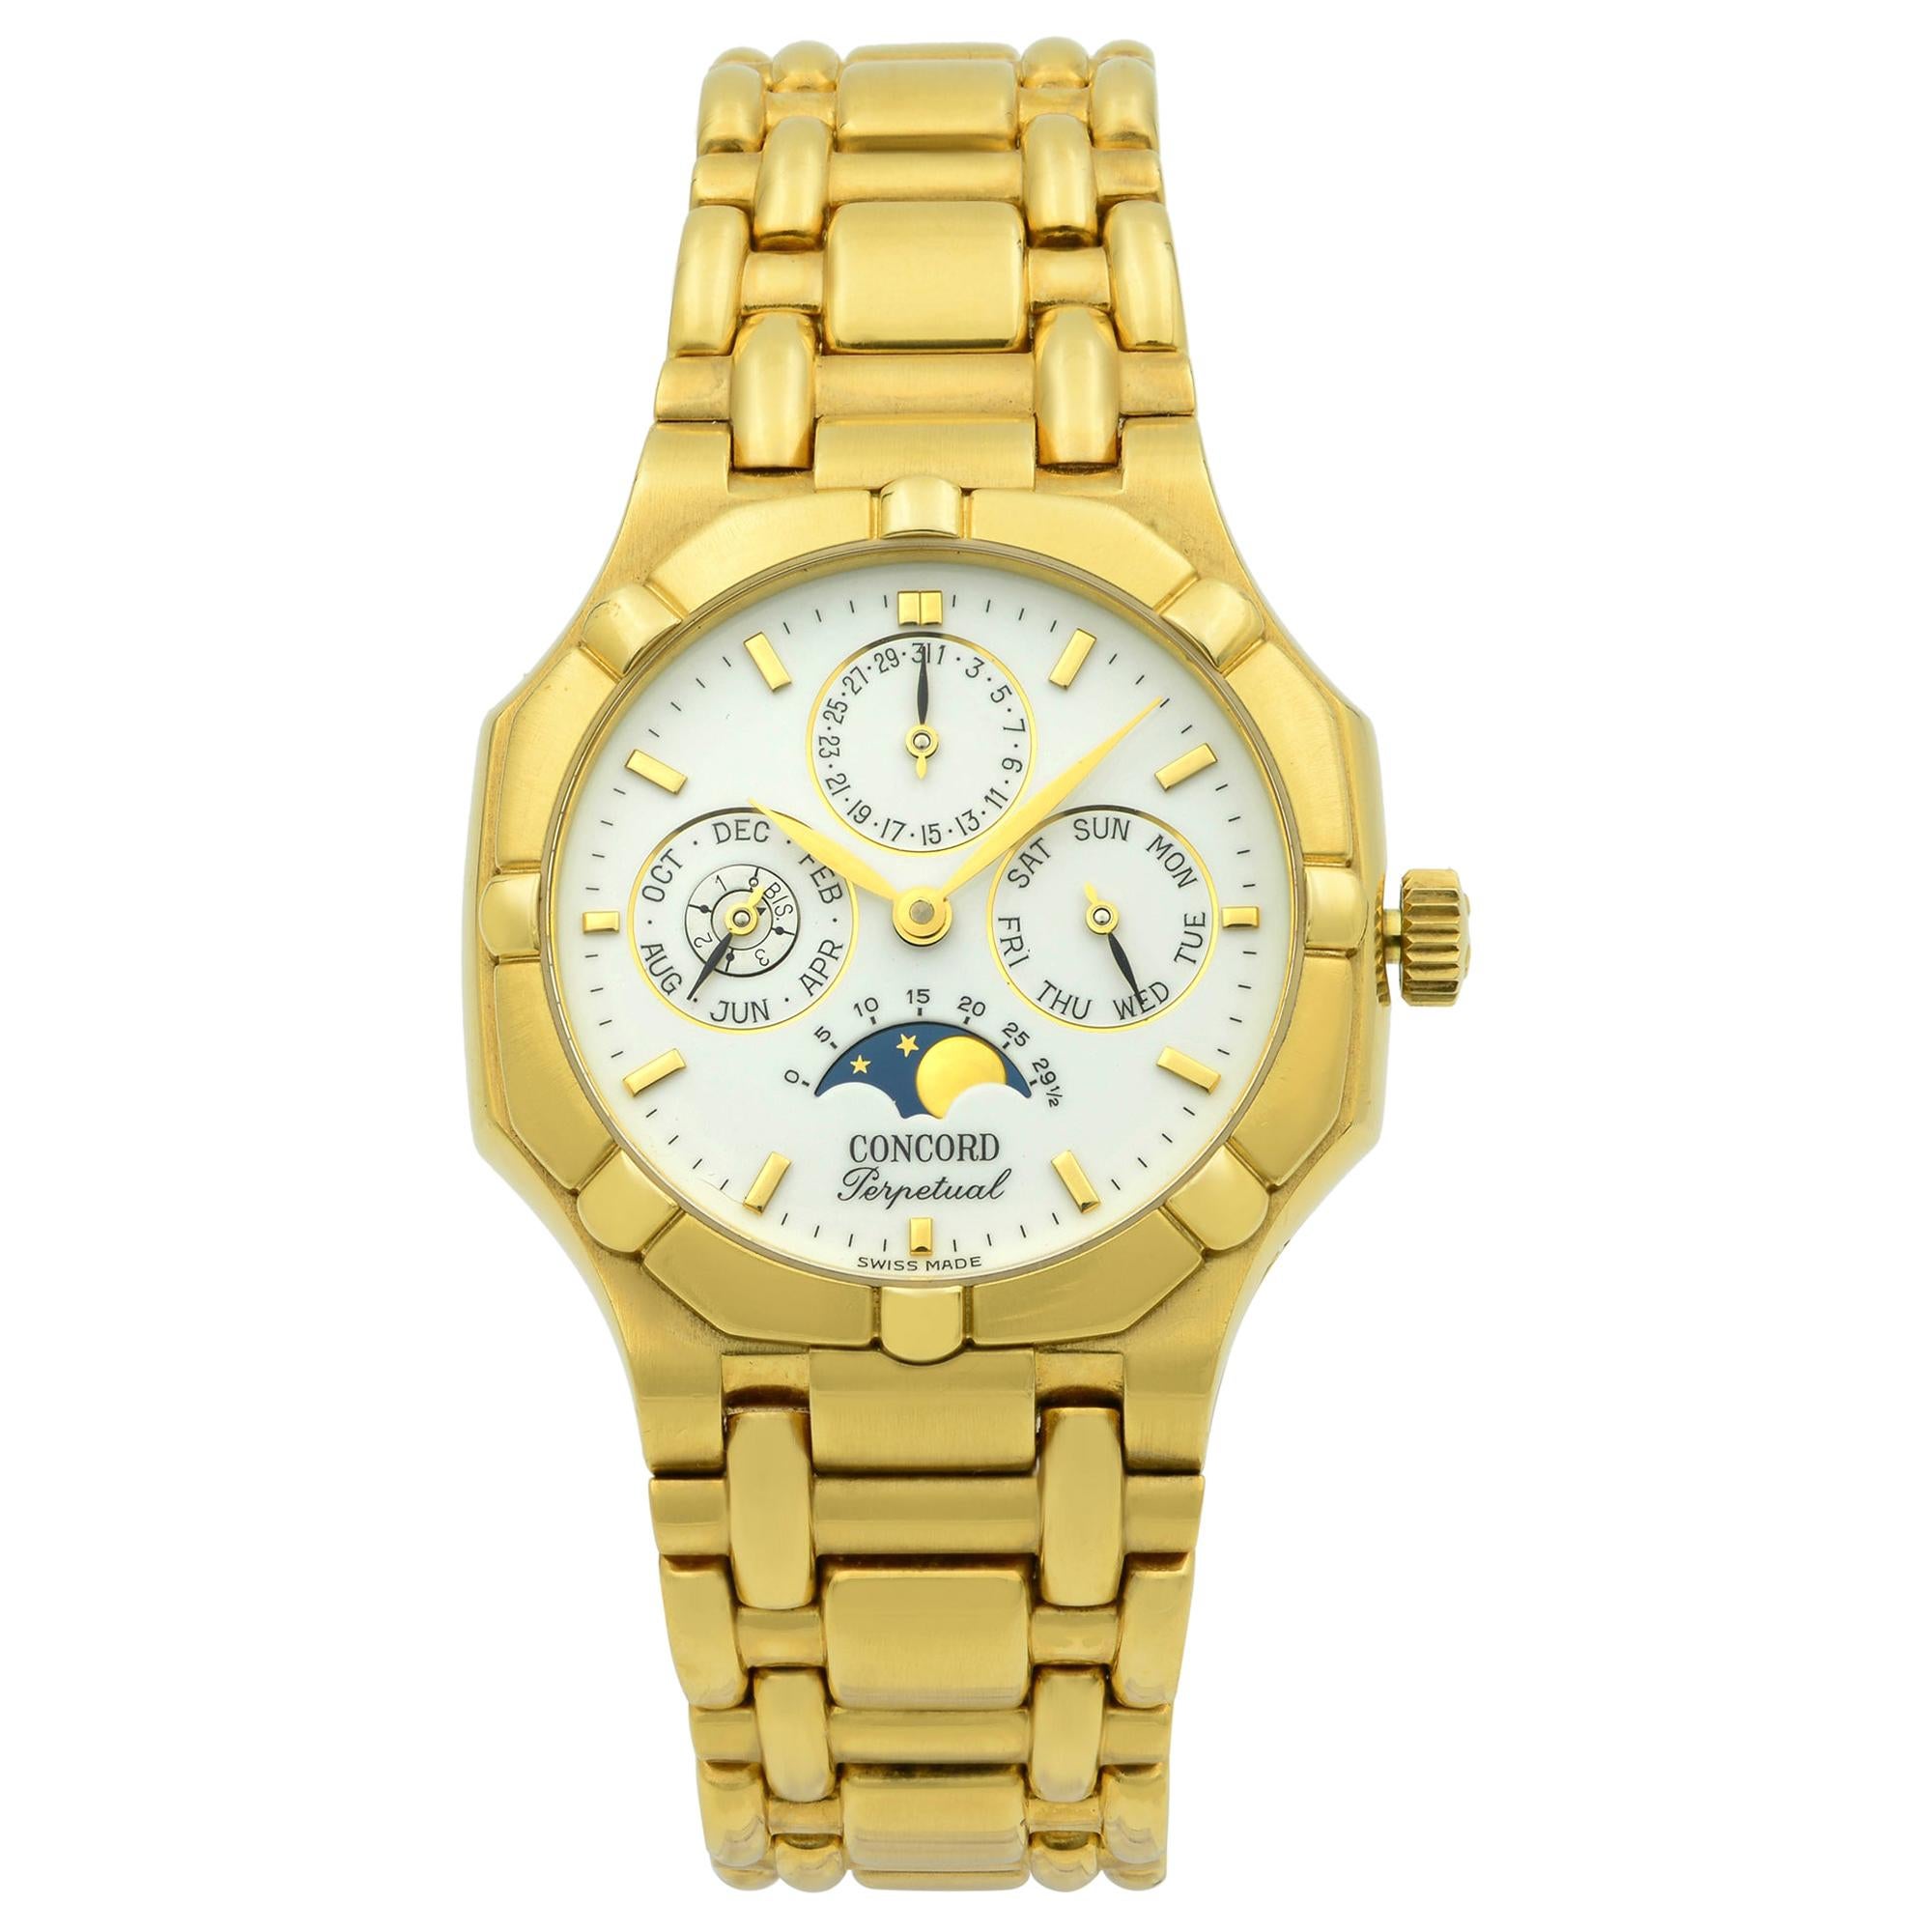 Concord Saratoga 18K Gold Perpetual White Dial Automatic Men's Watch 50 B3 237